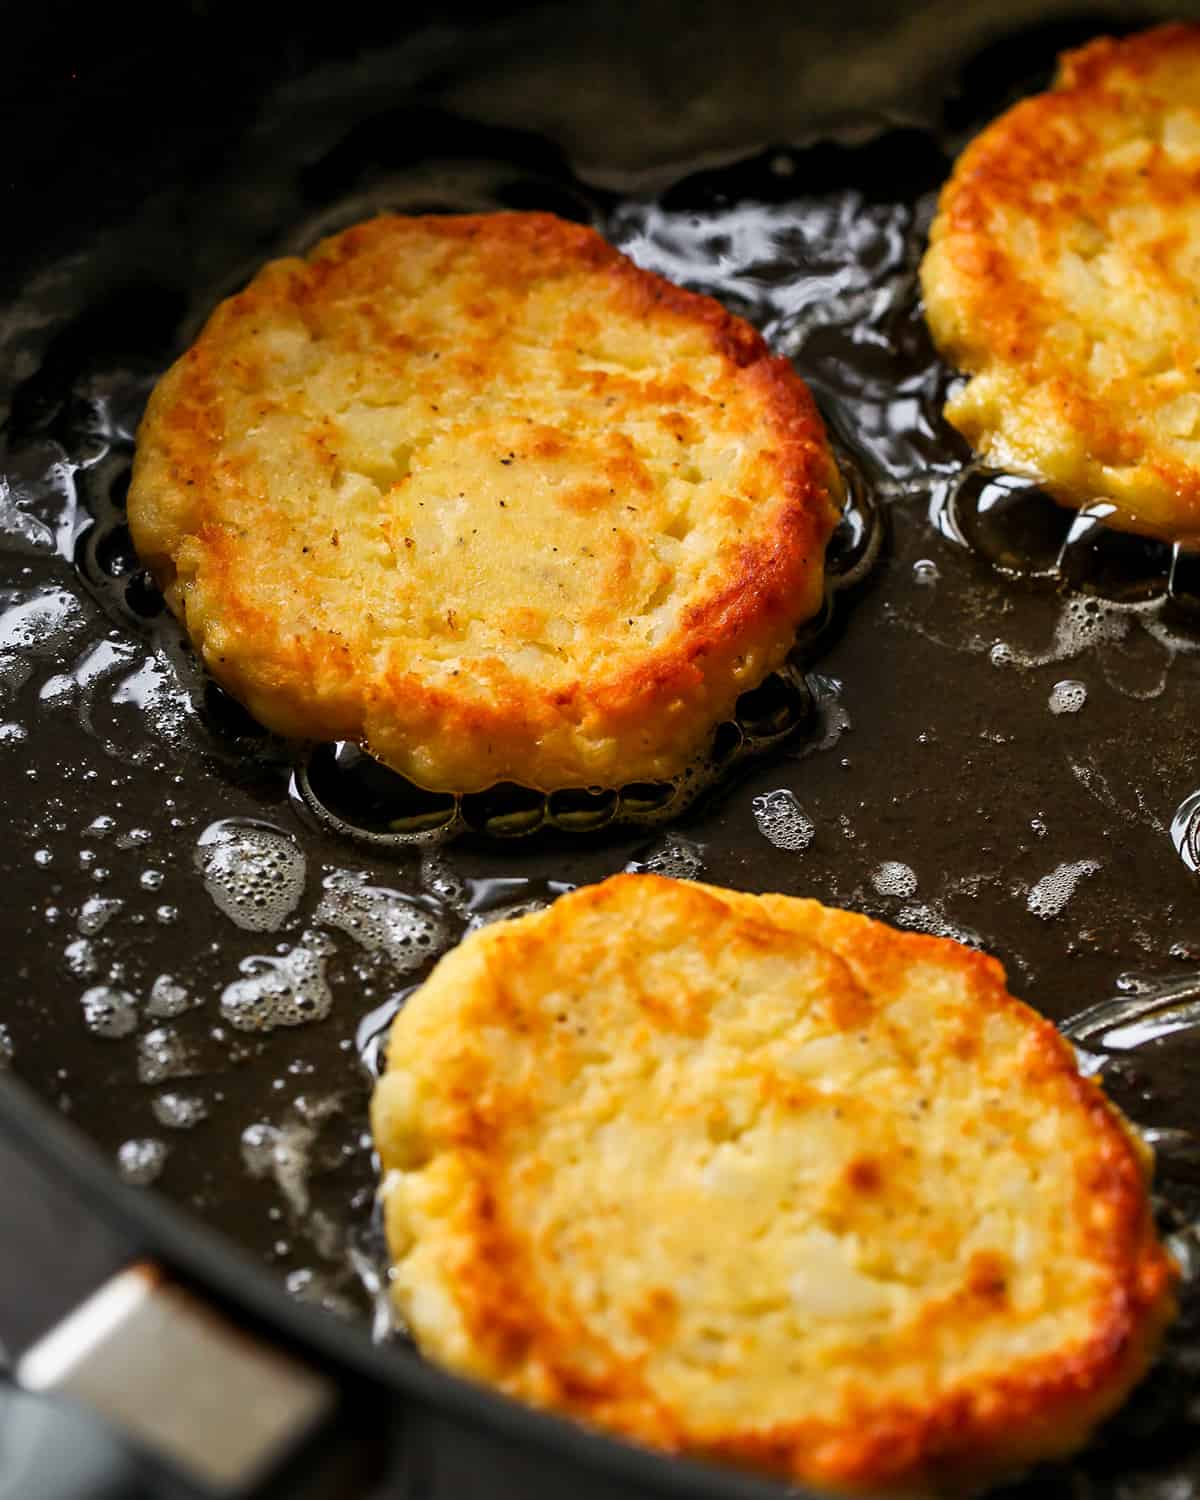 How To Make Potato Pancakes - cooking potato pancakes on the second side in an oiled skillet